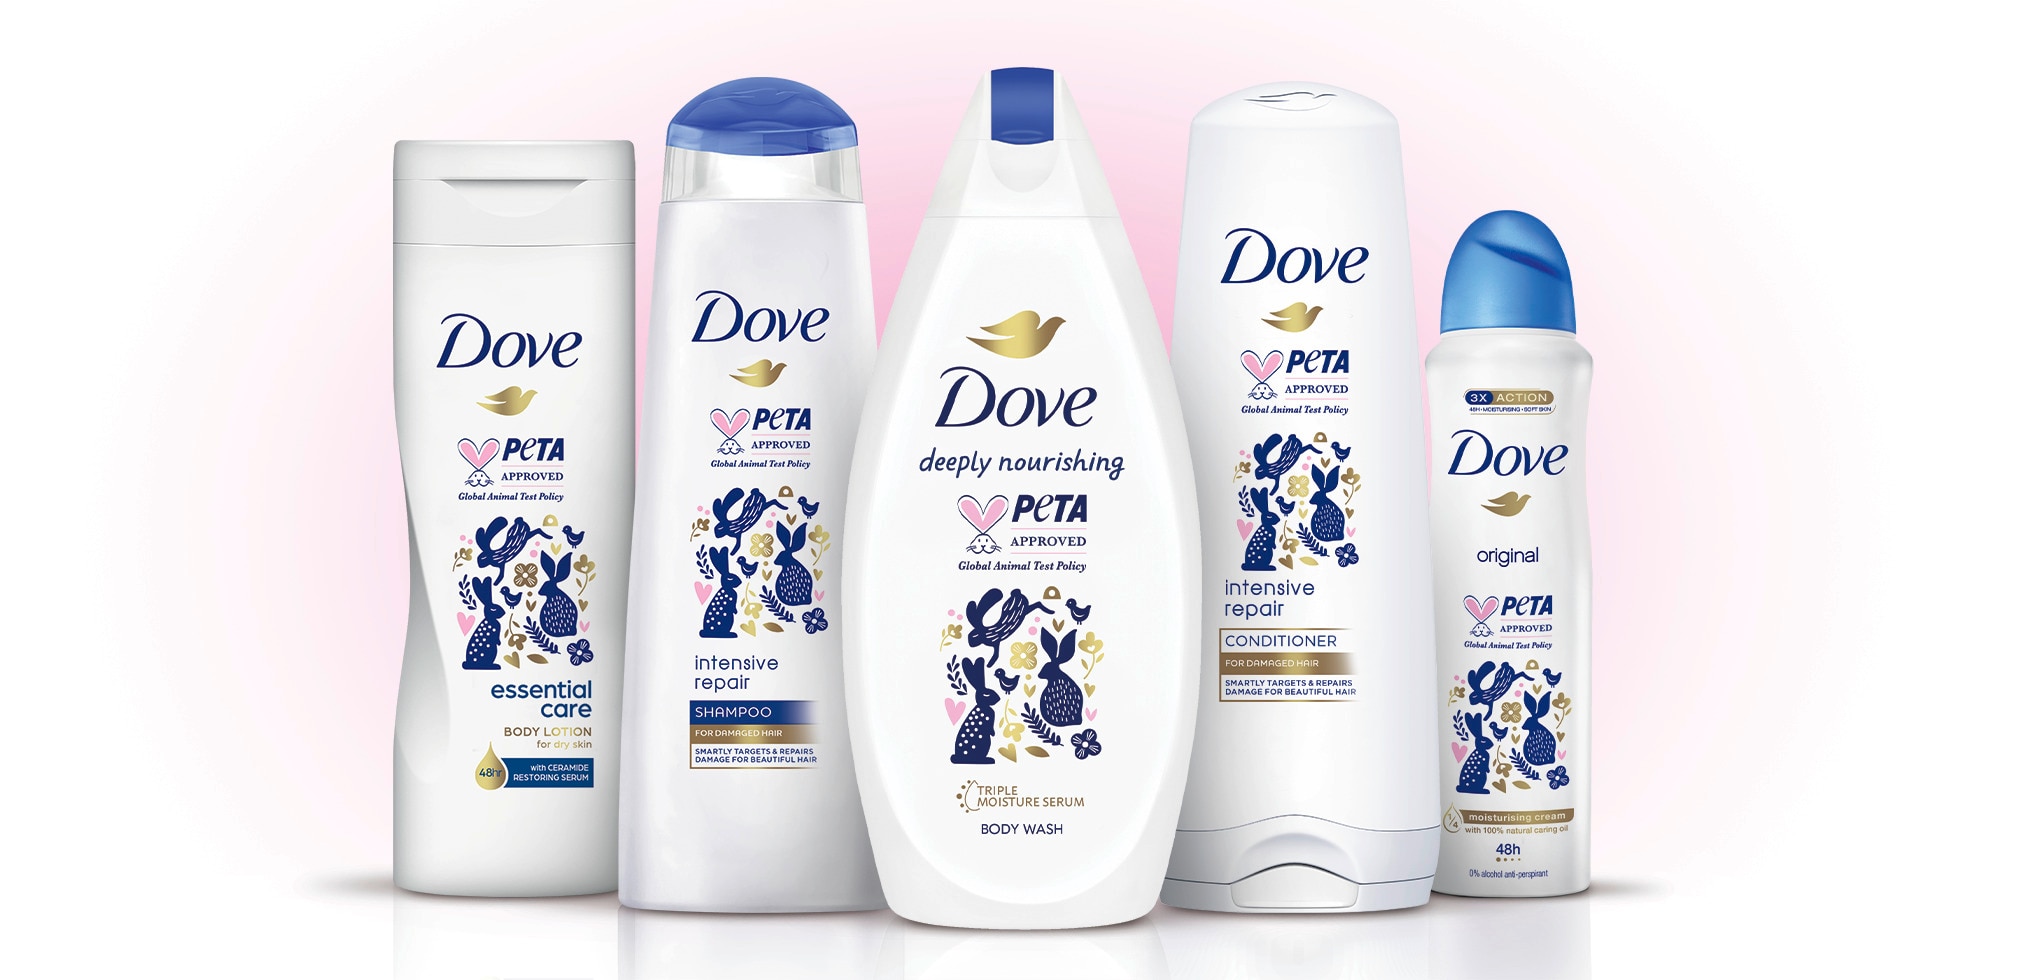 Dove Take Action to Save Cruelty-Free Cosmetics